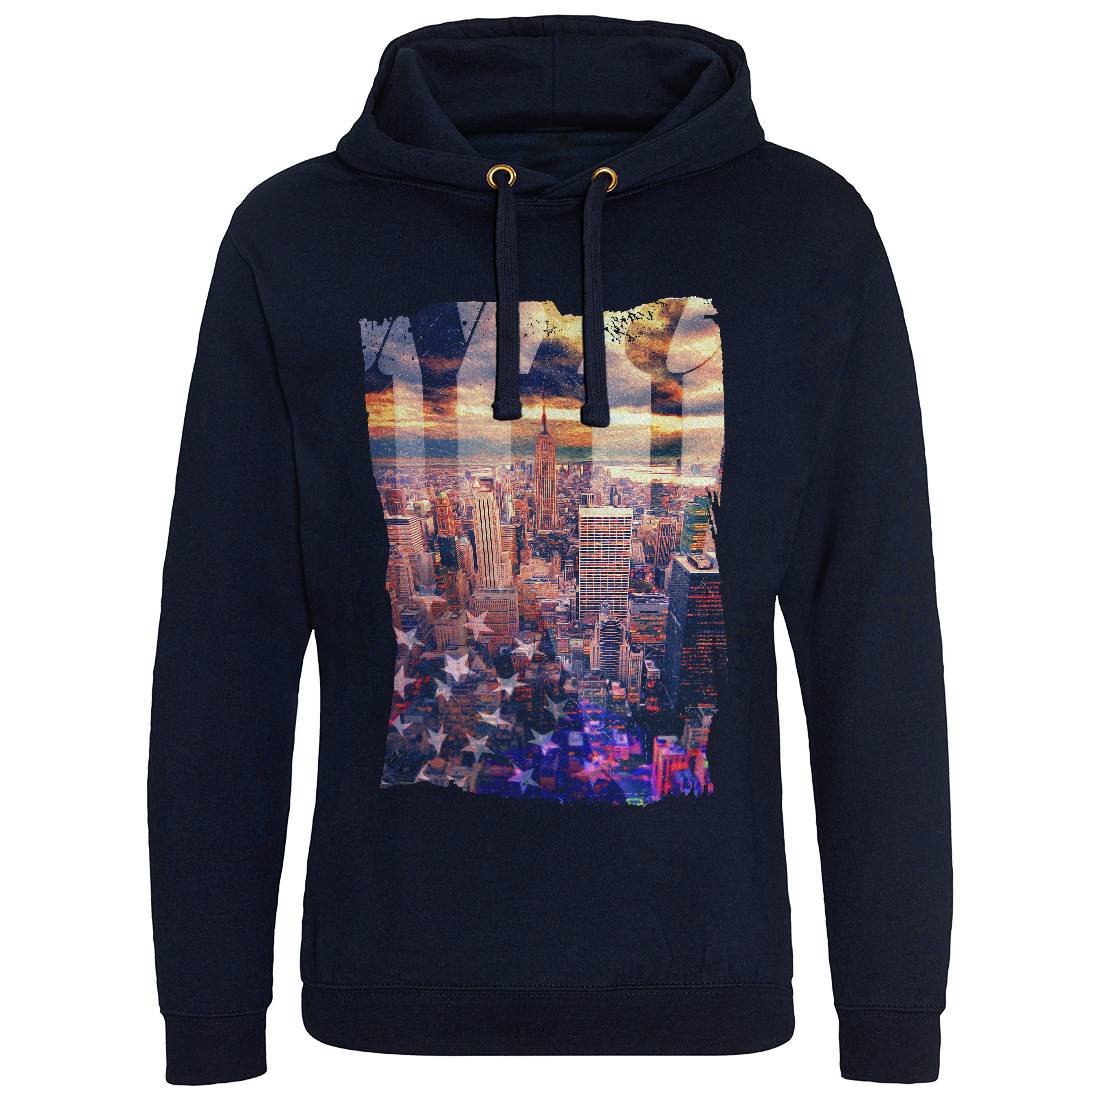 Dreaming Mens Hoodie Without Pocket Art A826